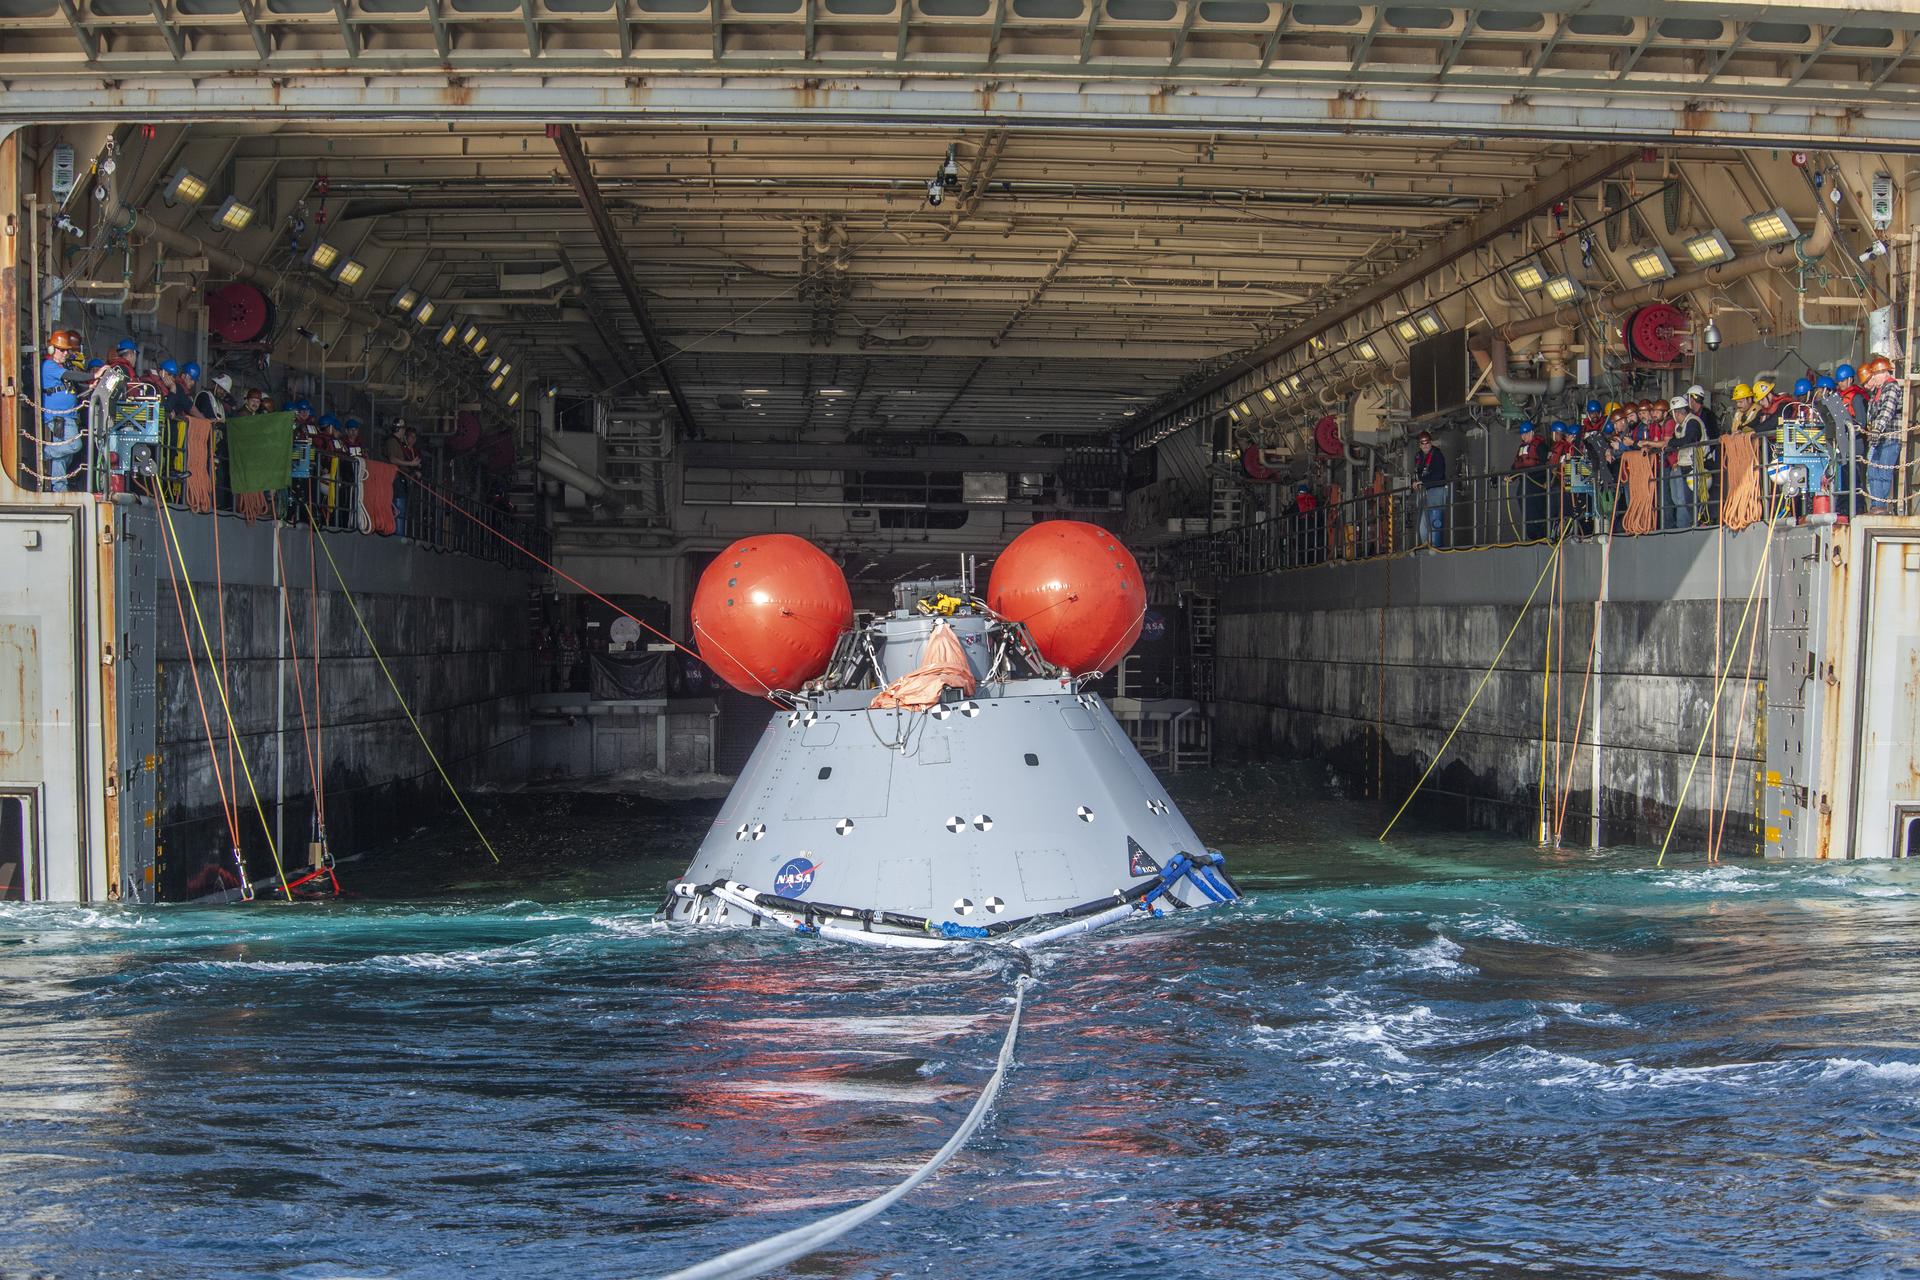 NASA's Landing and Recovery Team practices bringing a mock Orion capsule into the well deck of the USS Portland (LPD 27) ahead of the Artemis I Orion splashdown slated for Dec. 11.